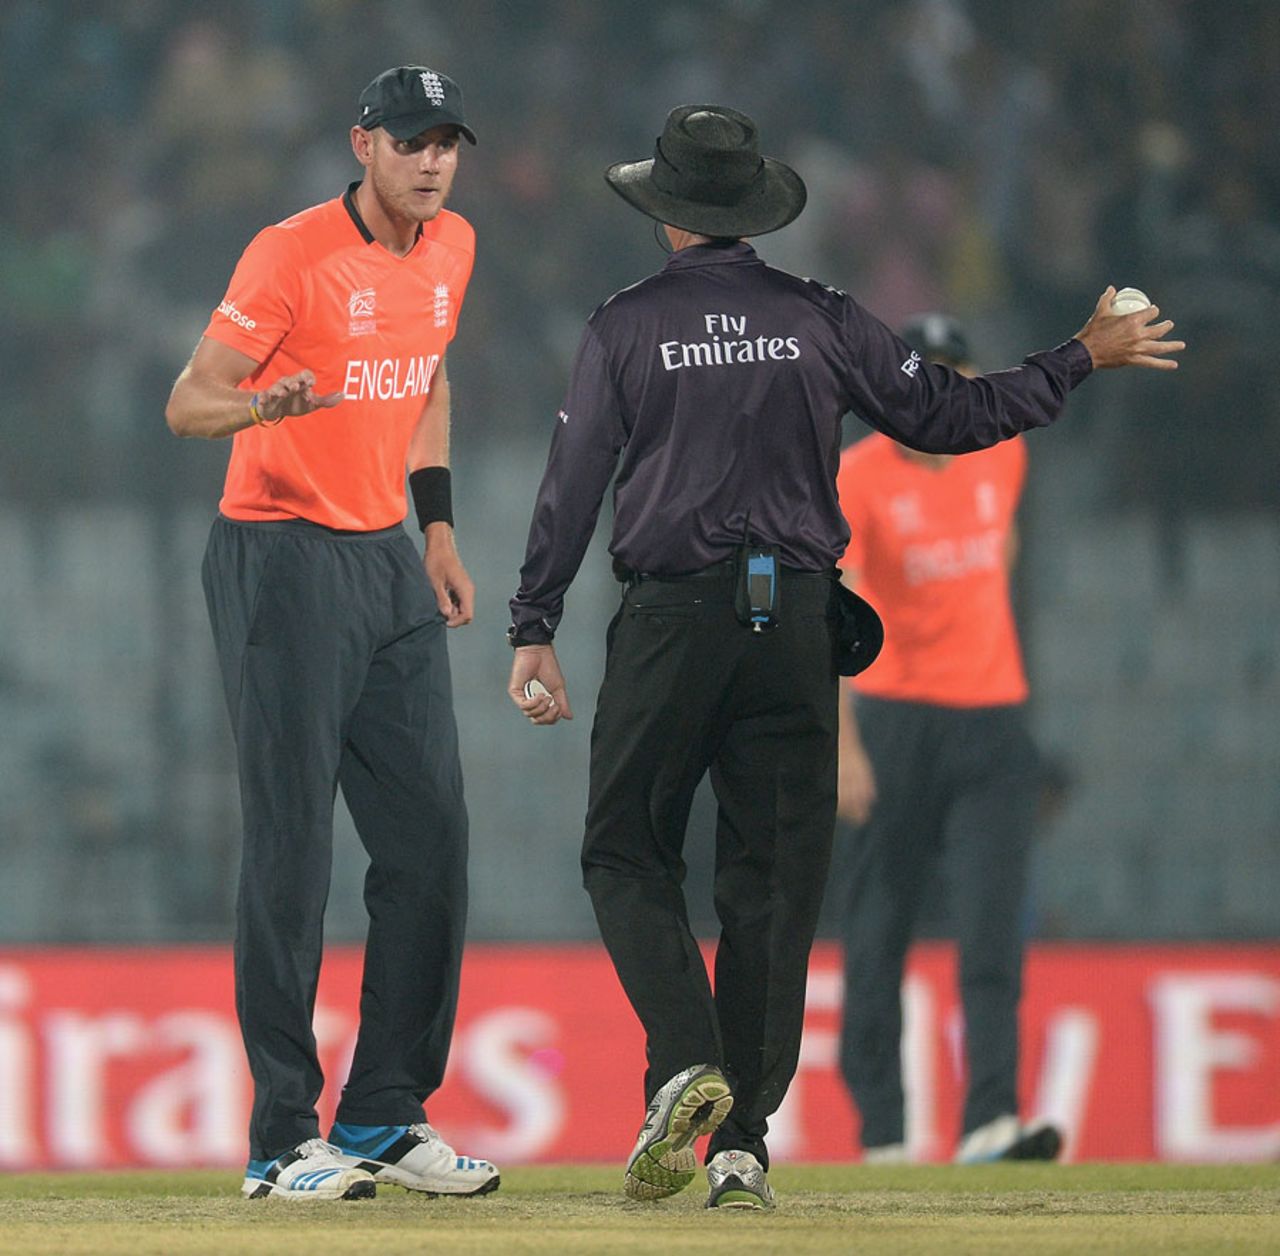 Stuart Broad has a word with the umpire after Mahela Jayawardene was given not out caught, England v Sri Lanka, World T20, Group 1, Chittagong, March, 27, 2014